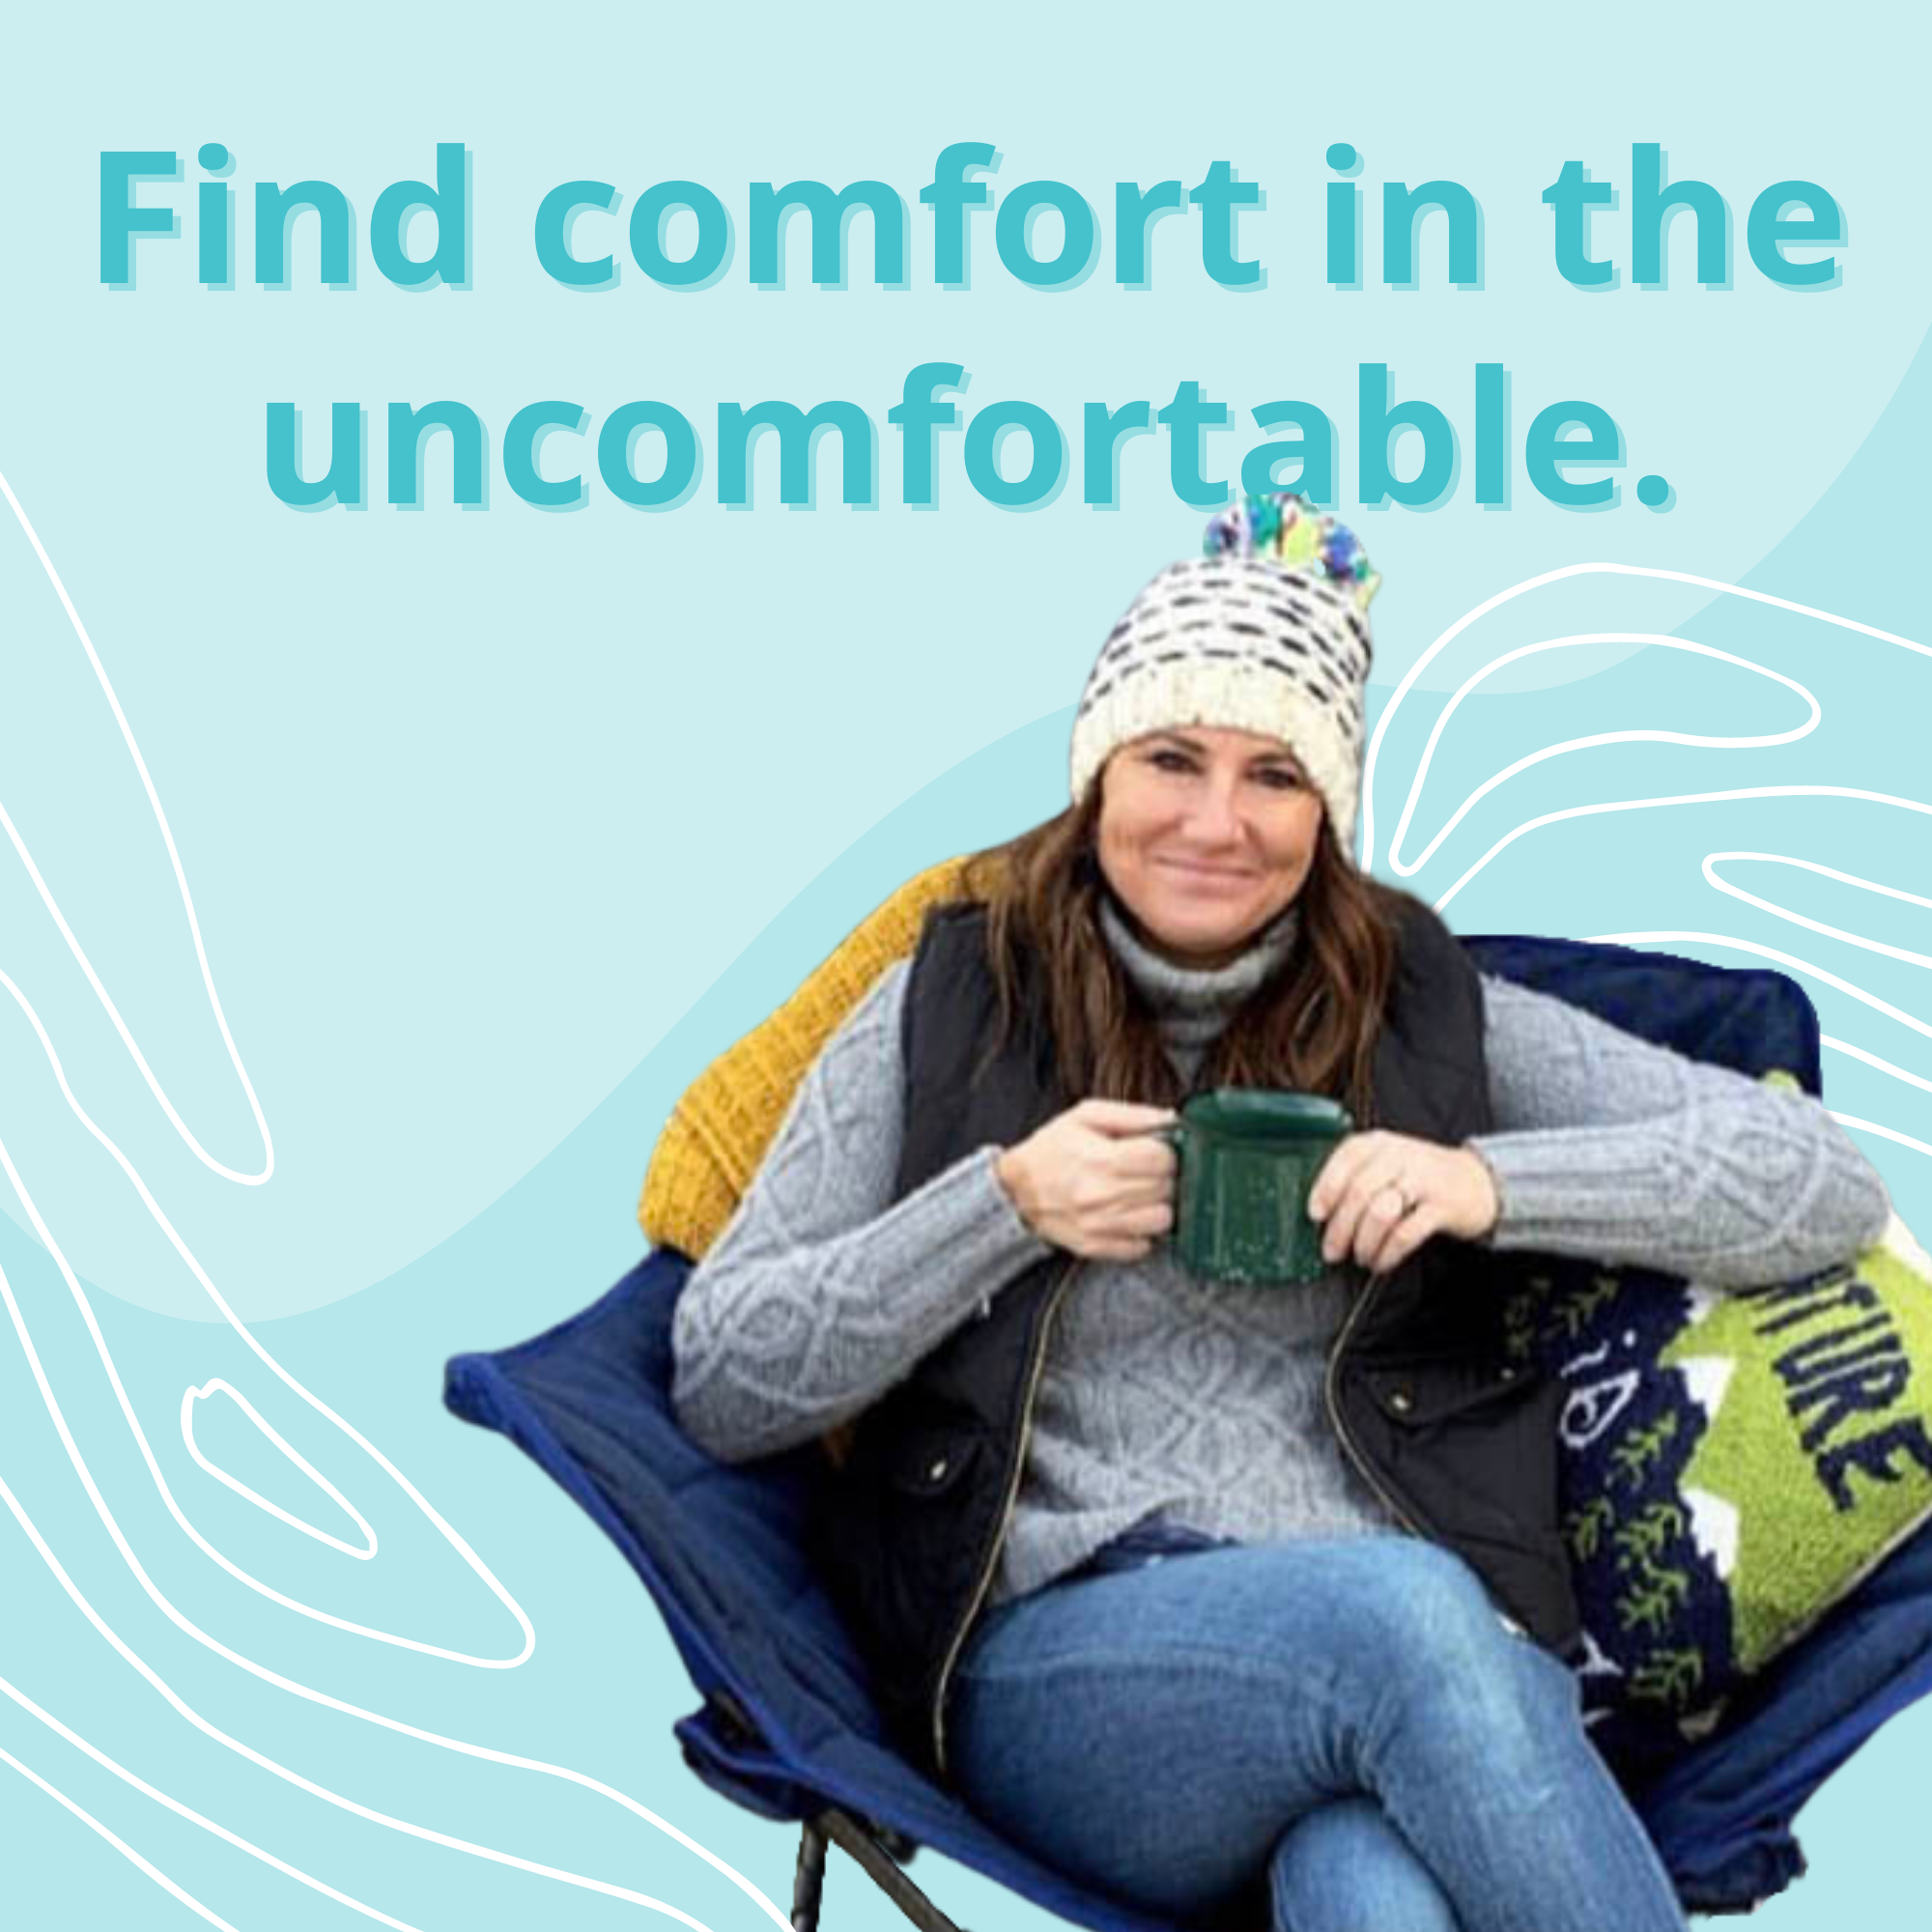 Find comfort in the uncomfortable